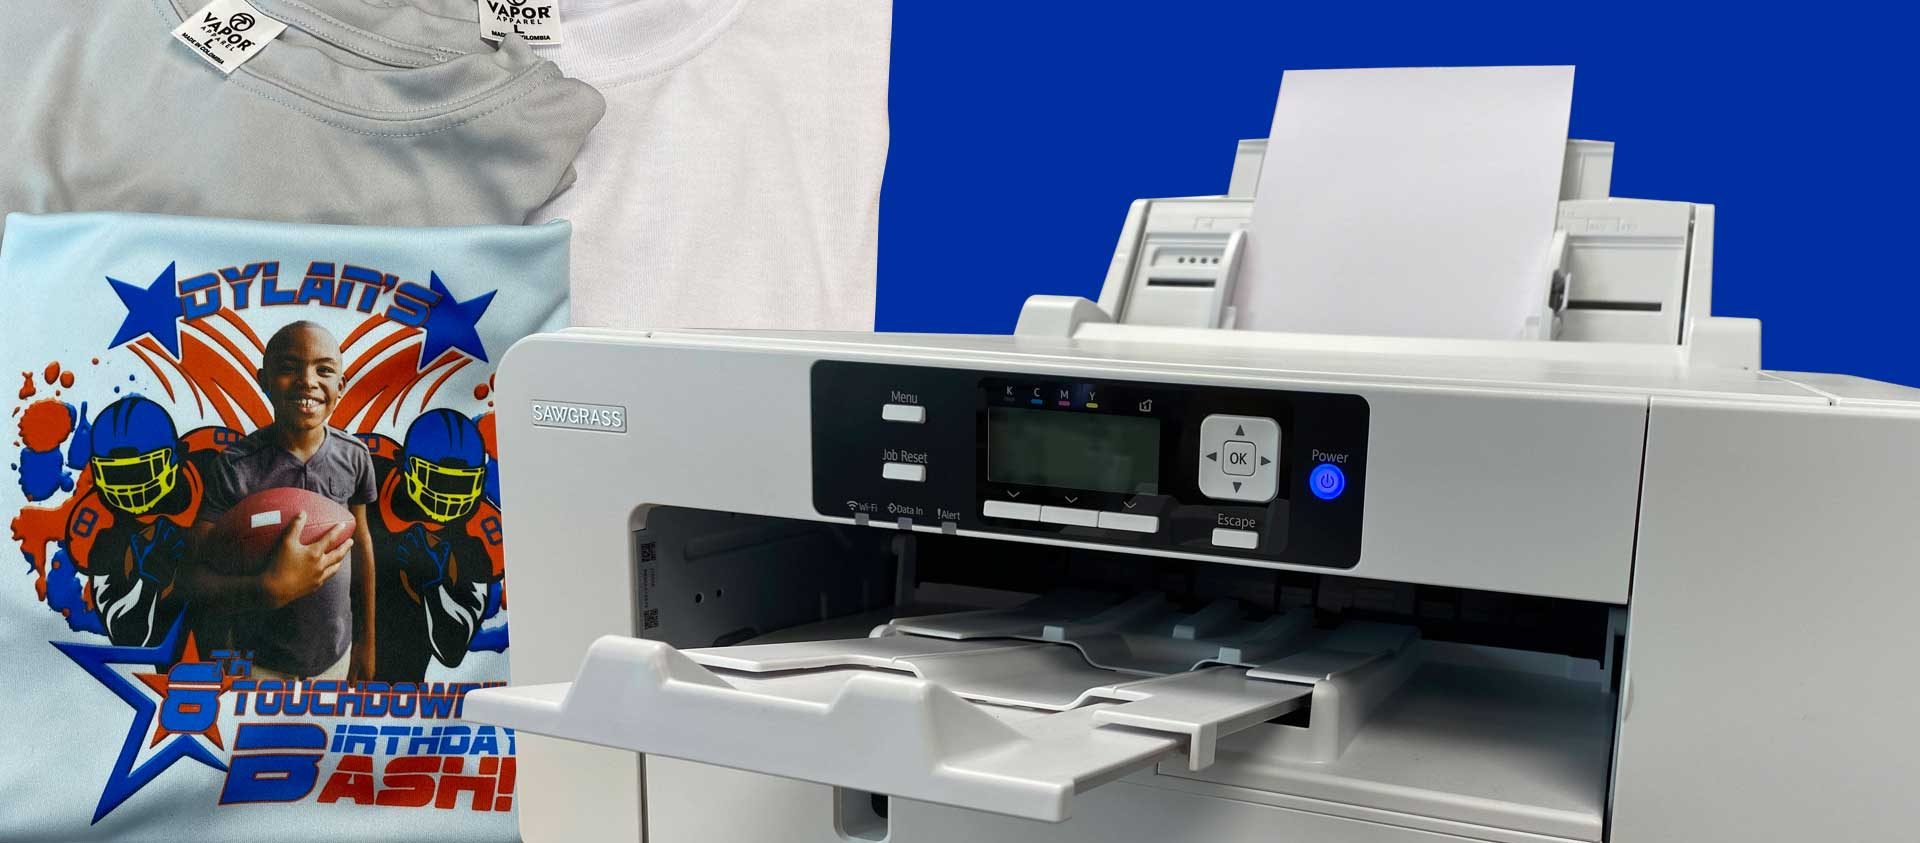 image of a sublimation printer